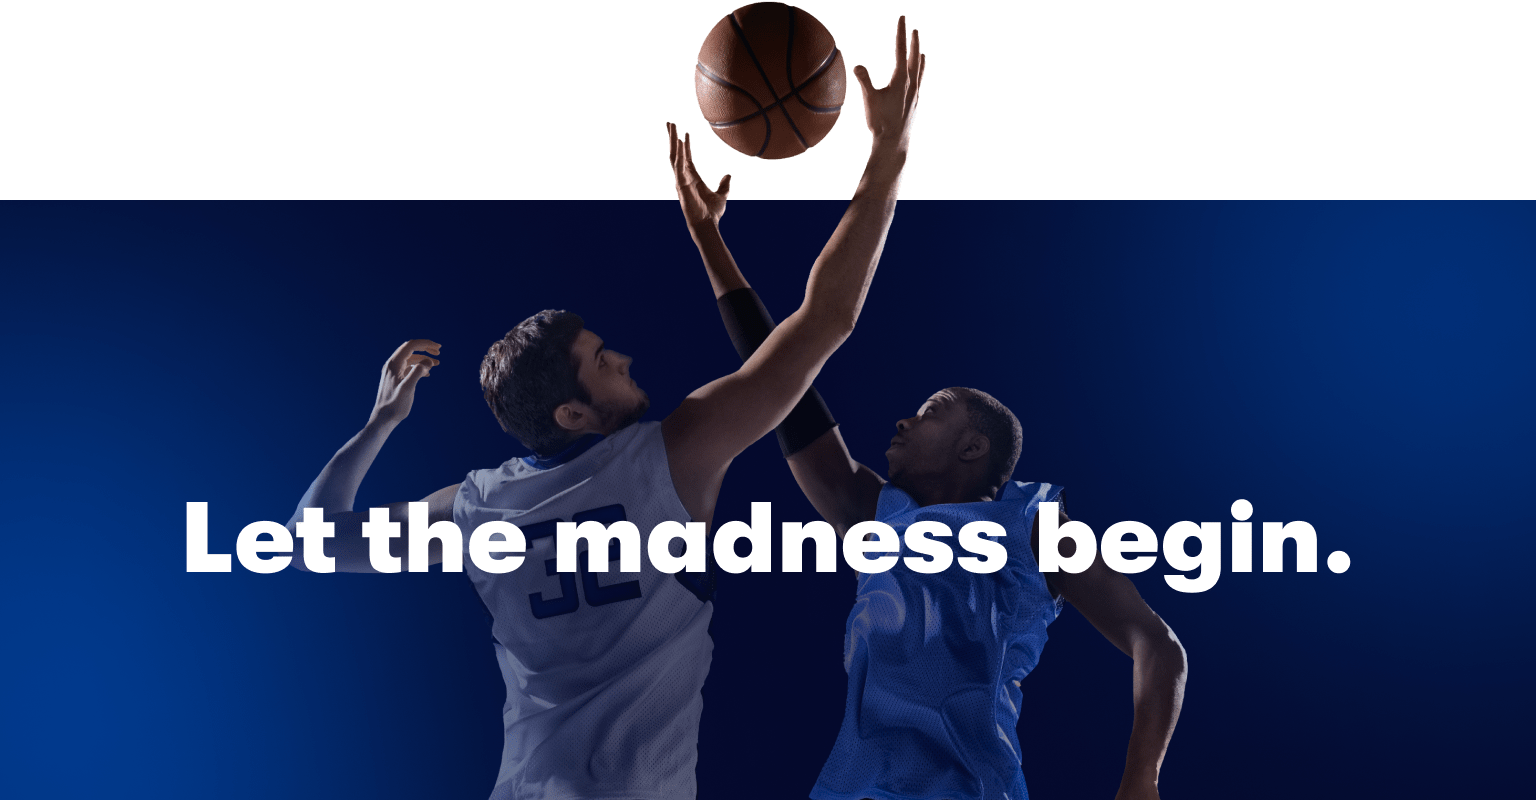 Let the madness begin: Score NCAAB Tournament tickets today